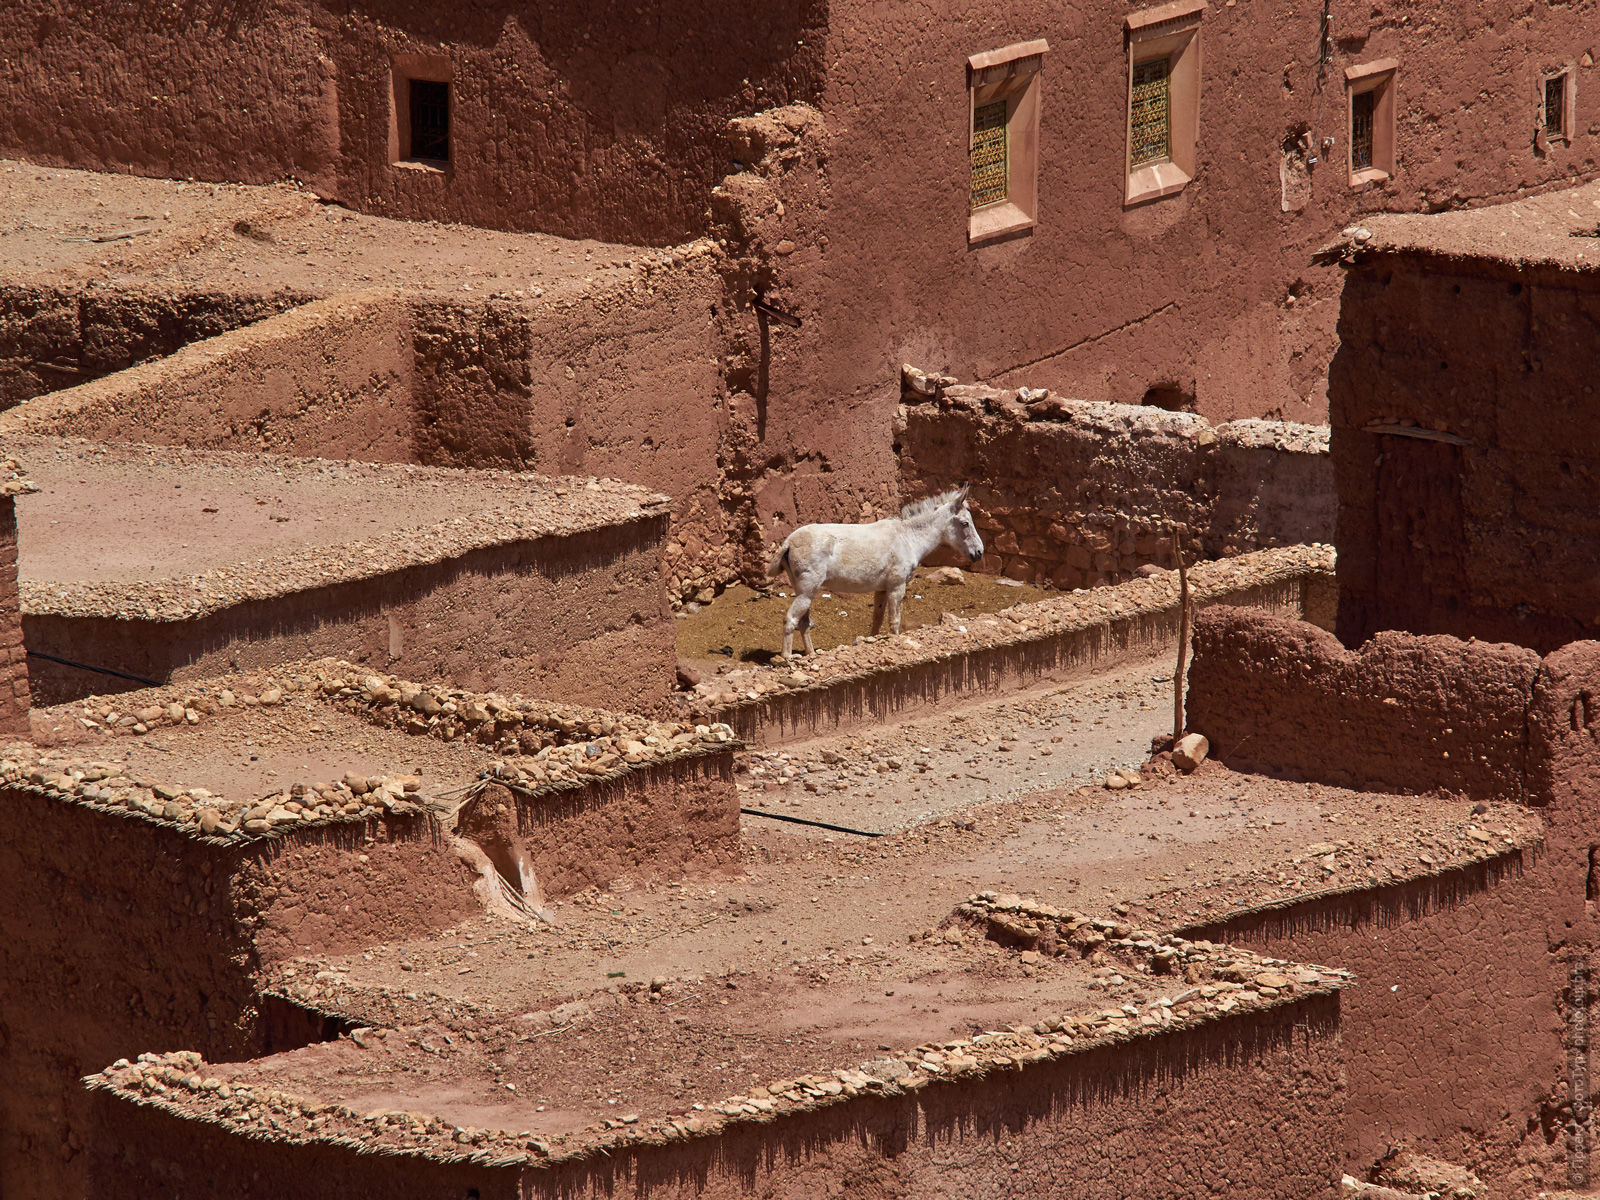 Roofs of the village of Tiger, Morocco. Adventure photo tour: medina, cascades, sands and ports of Morocco, April 4 - 17, 2020.